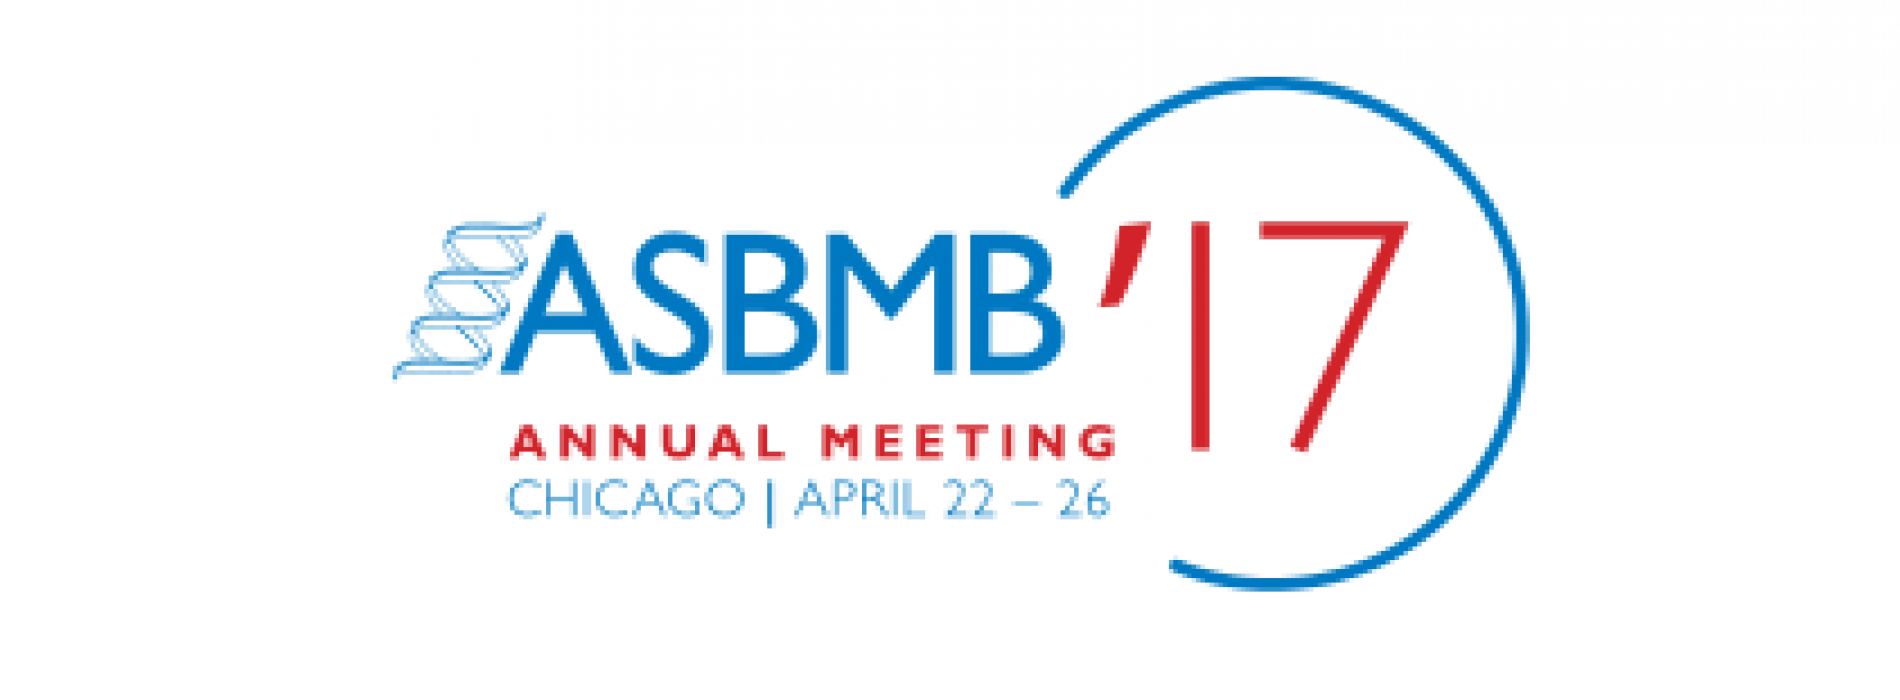 Last Chance to Showcase Your Work at ASBMB 2017